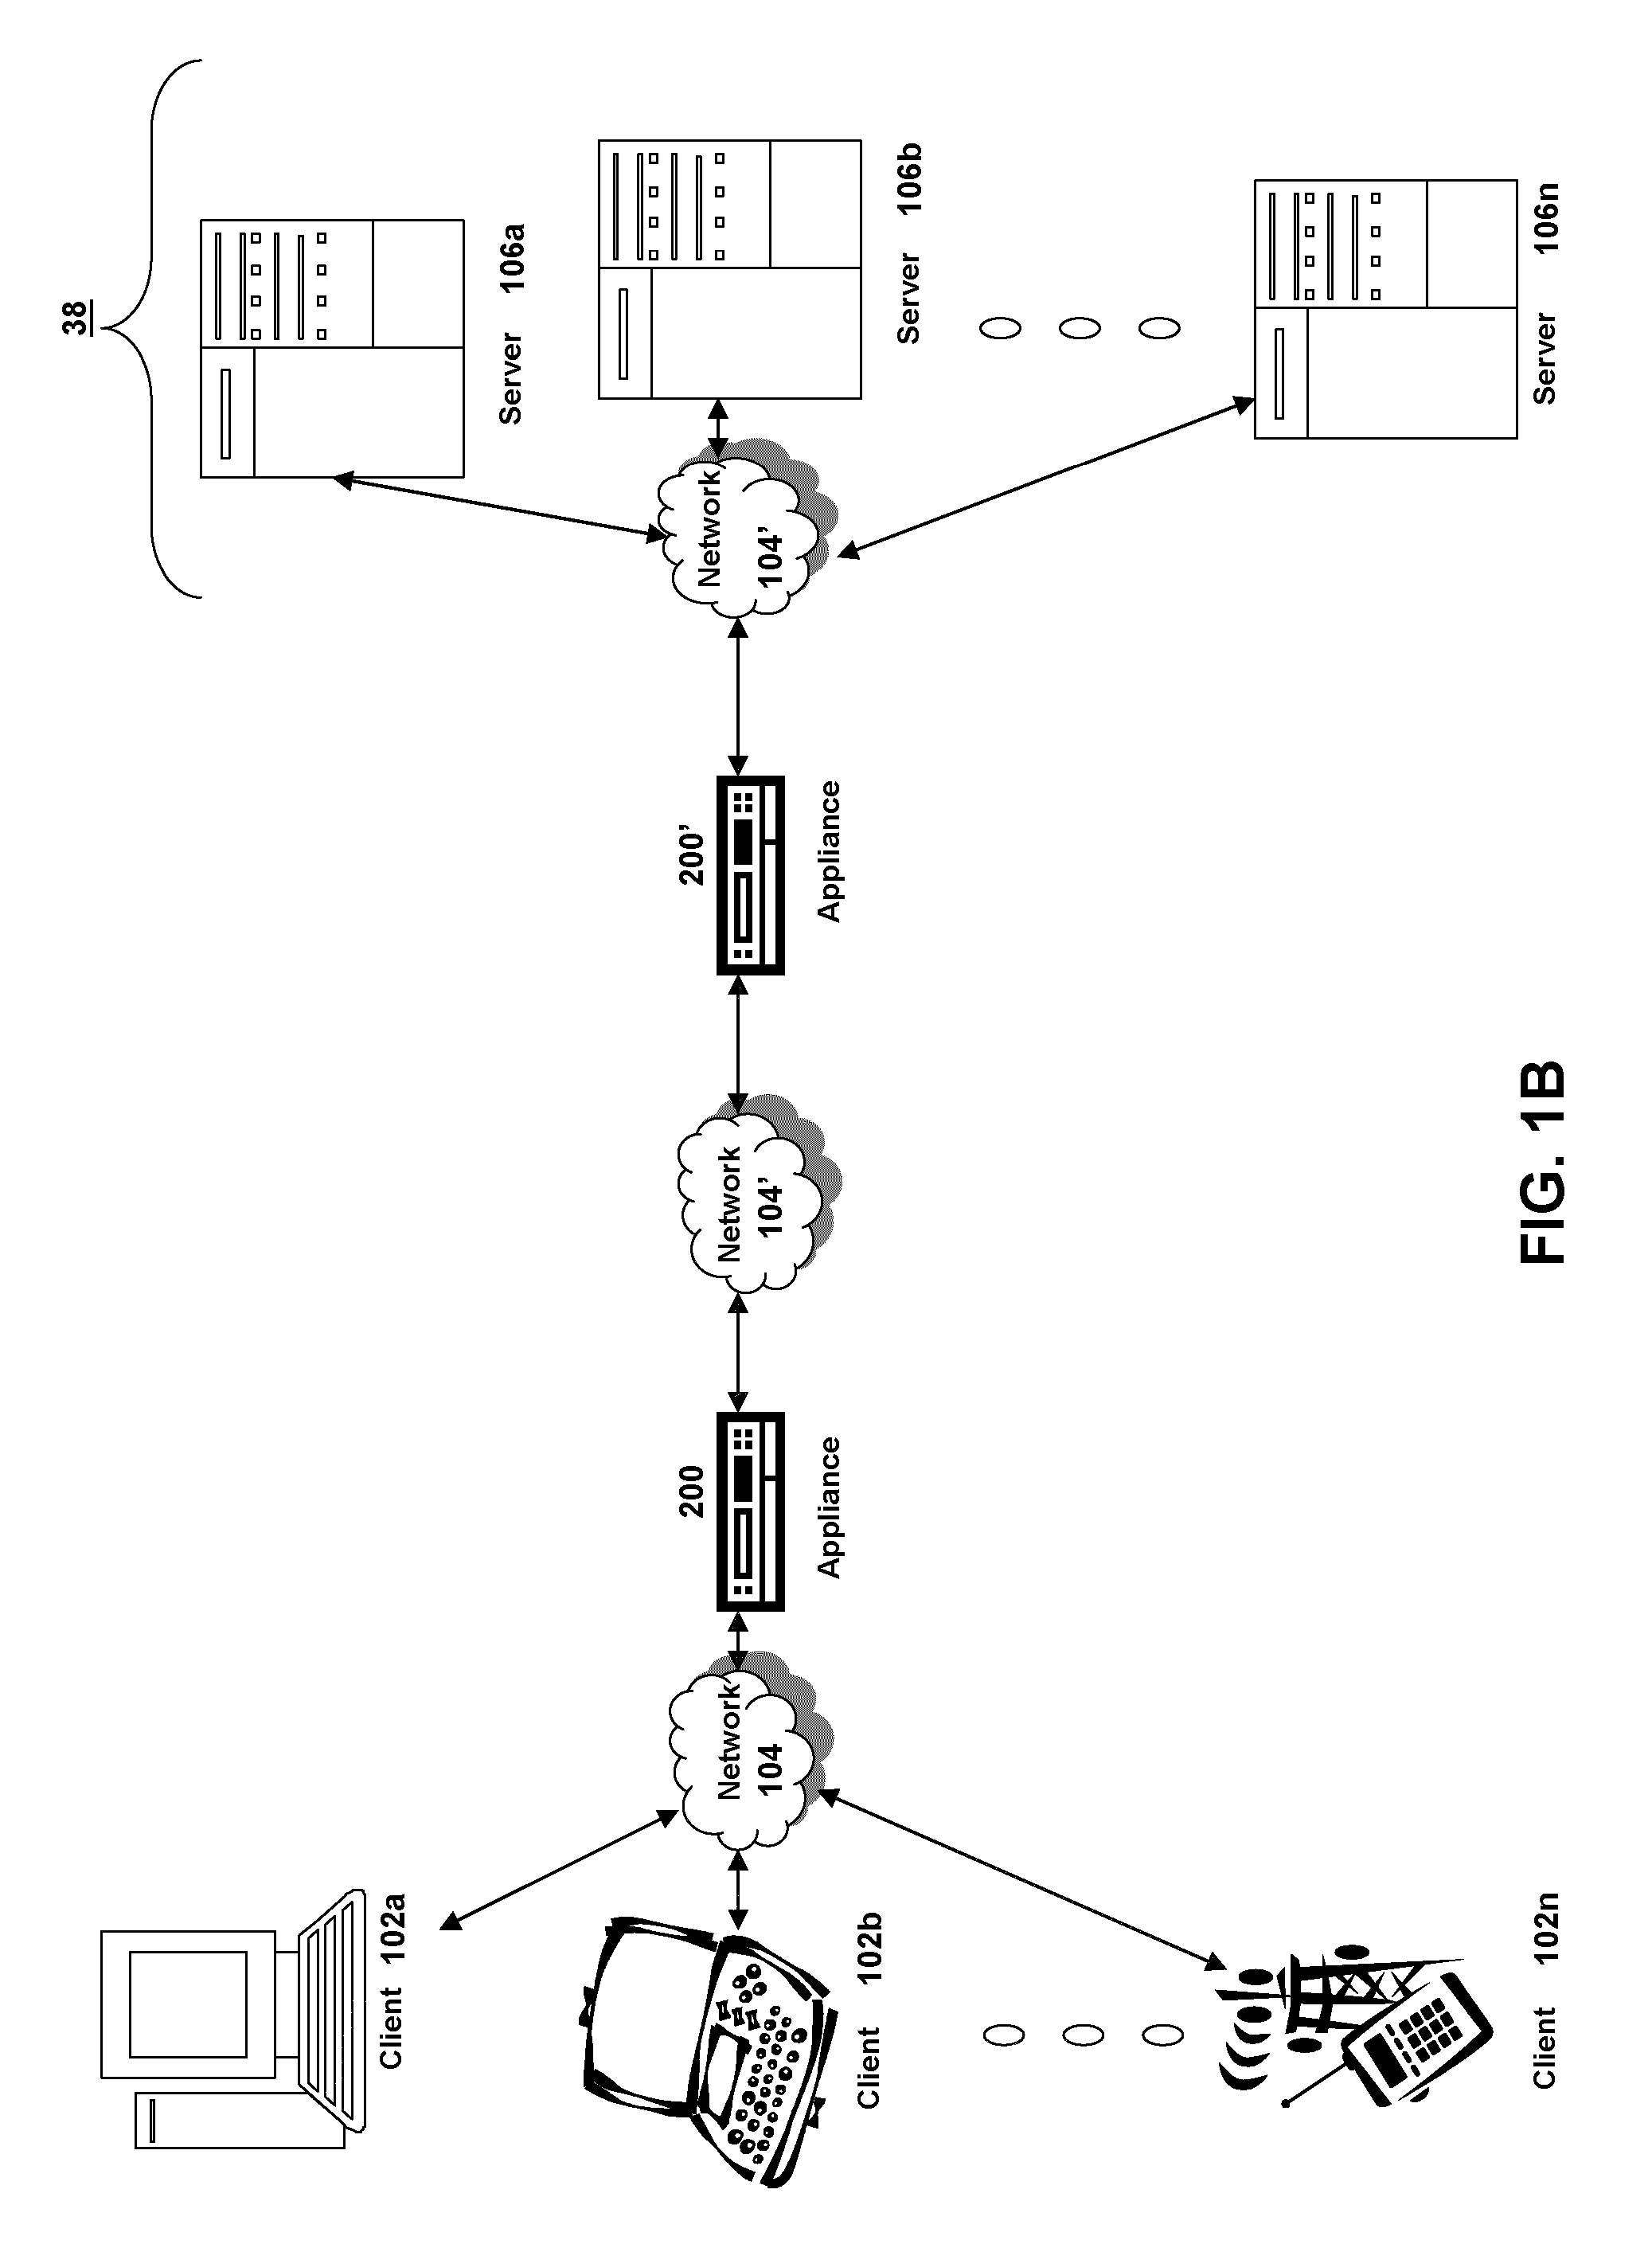 Systems and methods for providing dynamic spillover of virtual servers based on bandwidth